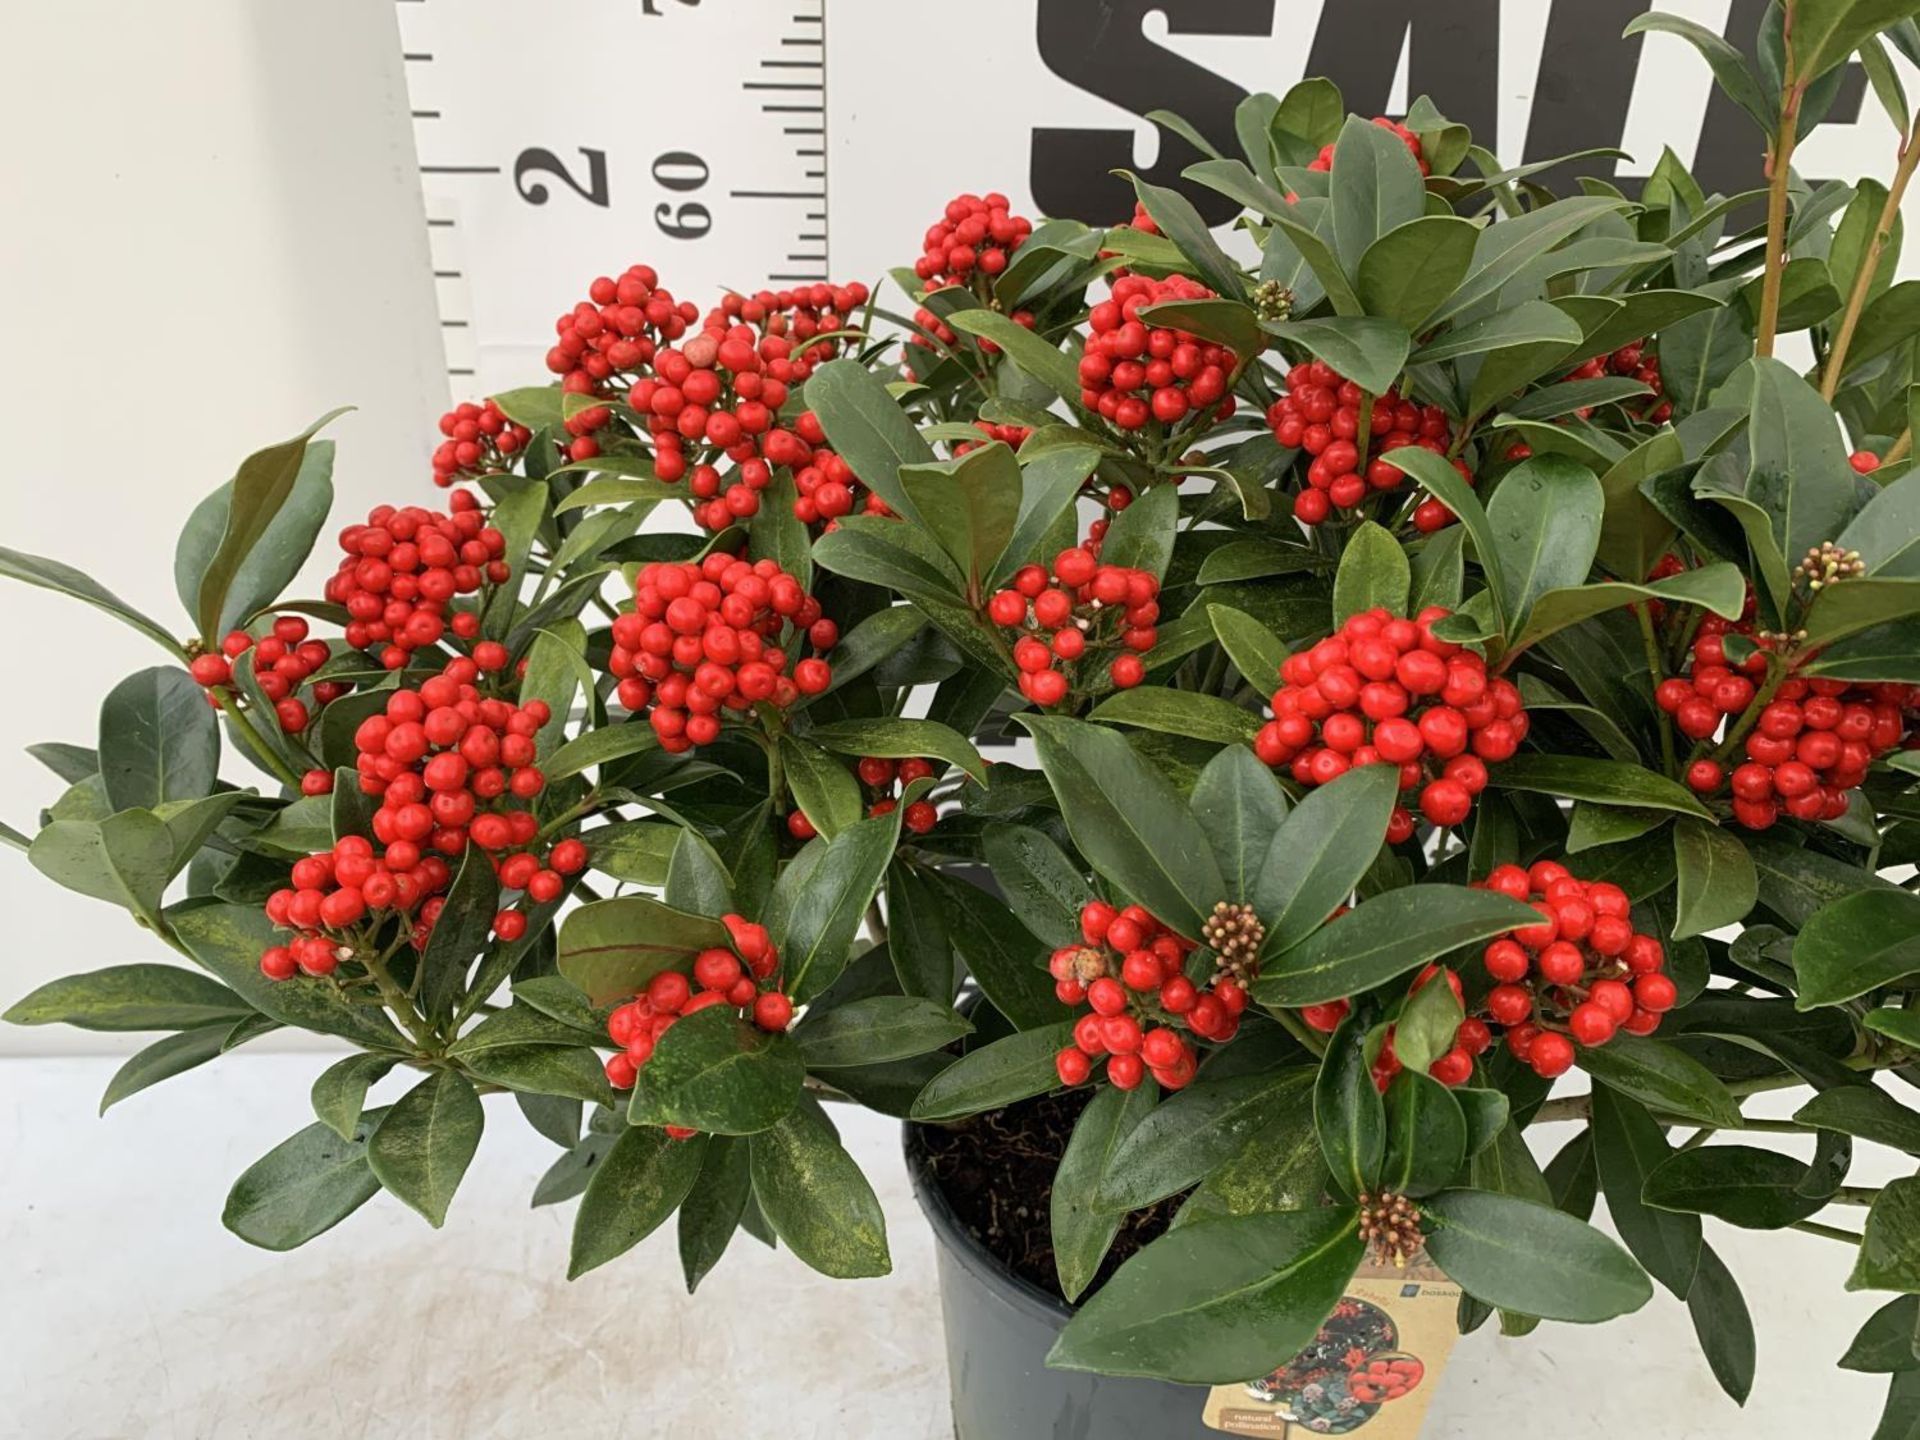 ONE LARGE SKIMMIA JAPONICA 'PABELLA' PLANT IN 5 LTR POT APPROX 75CM IN HEIGHT PLUS VAT - Image 5 of 11